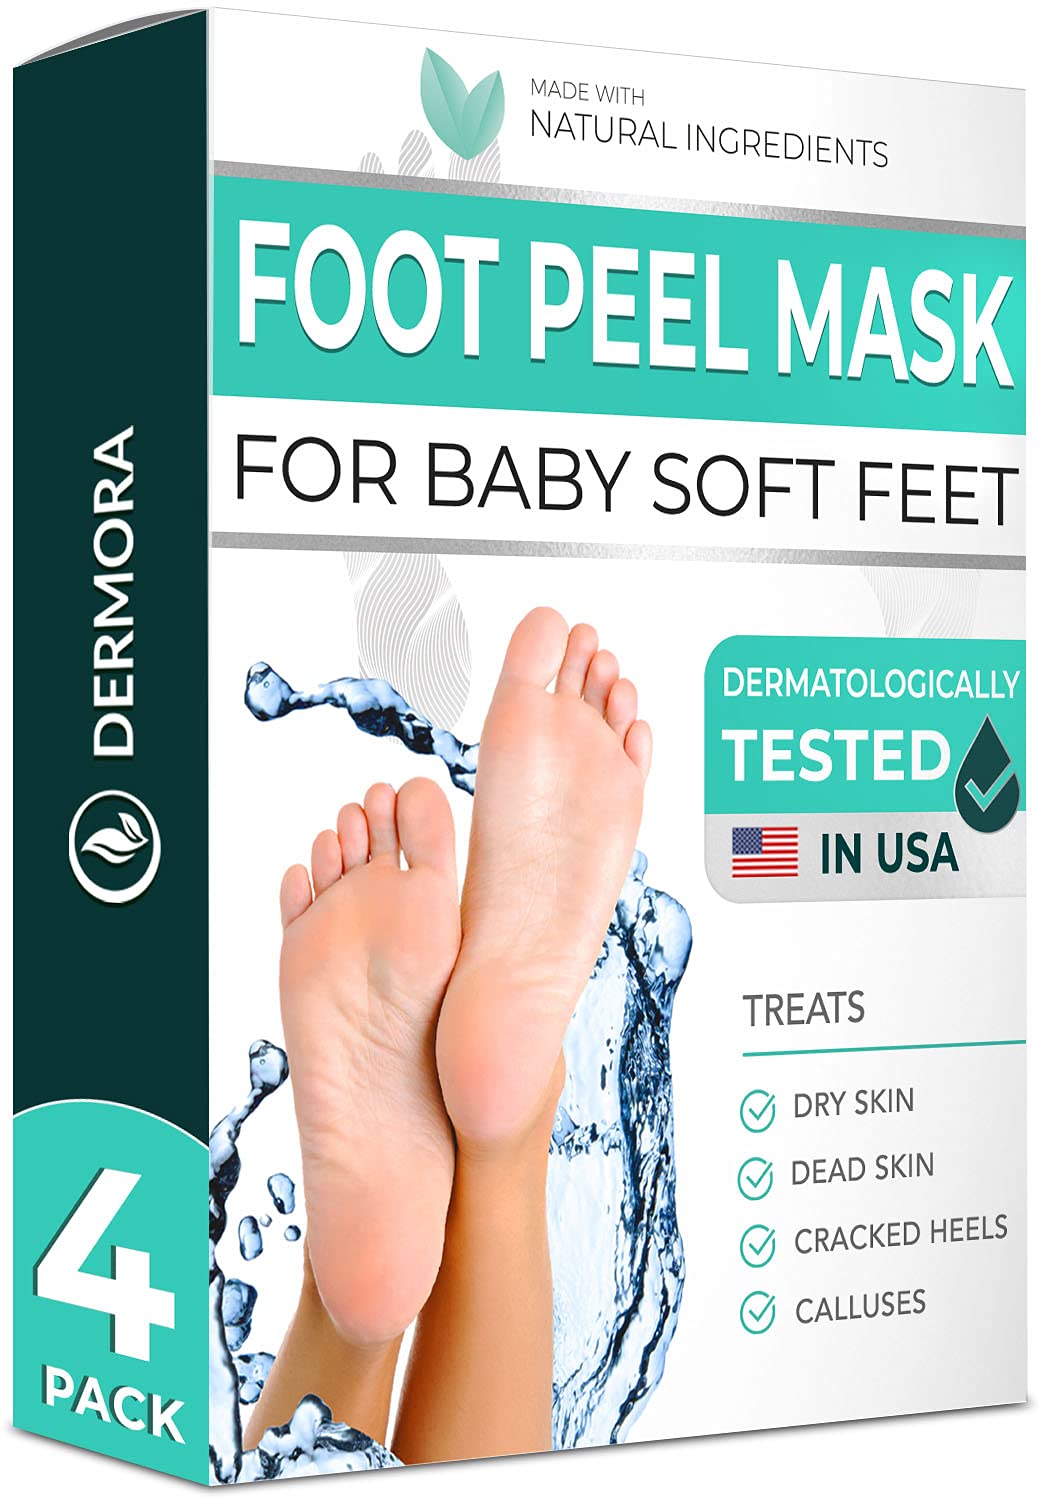 This foot peel mask provides soft, smooth results that fans love